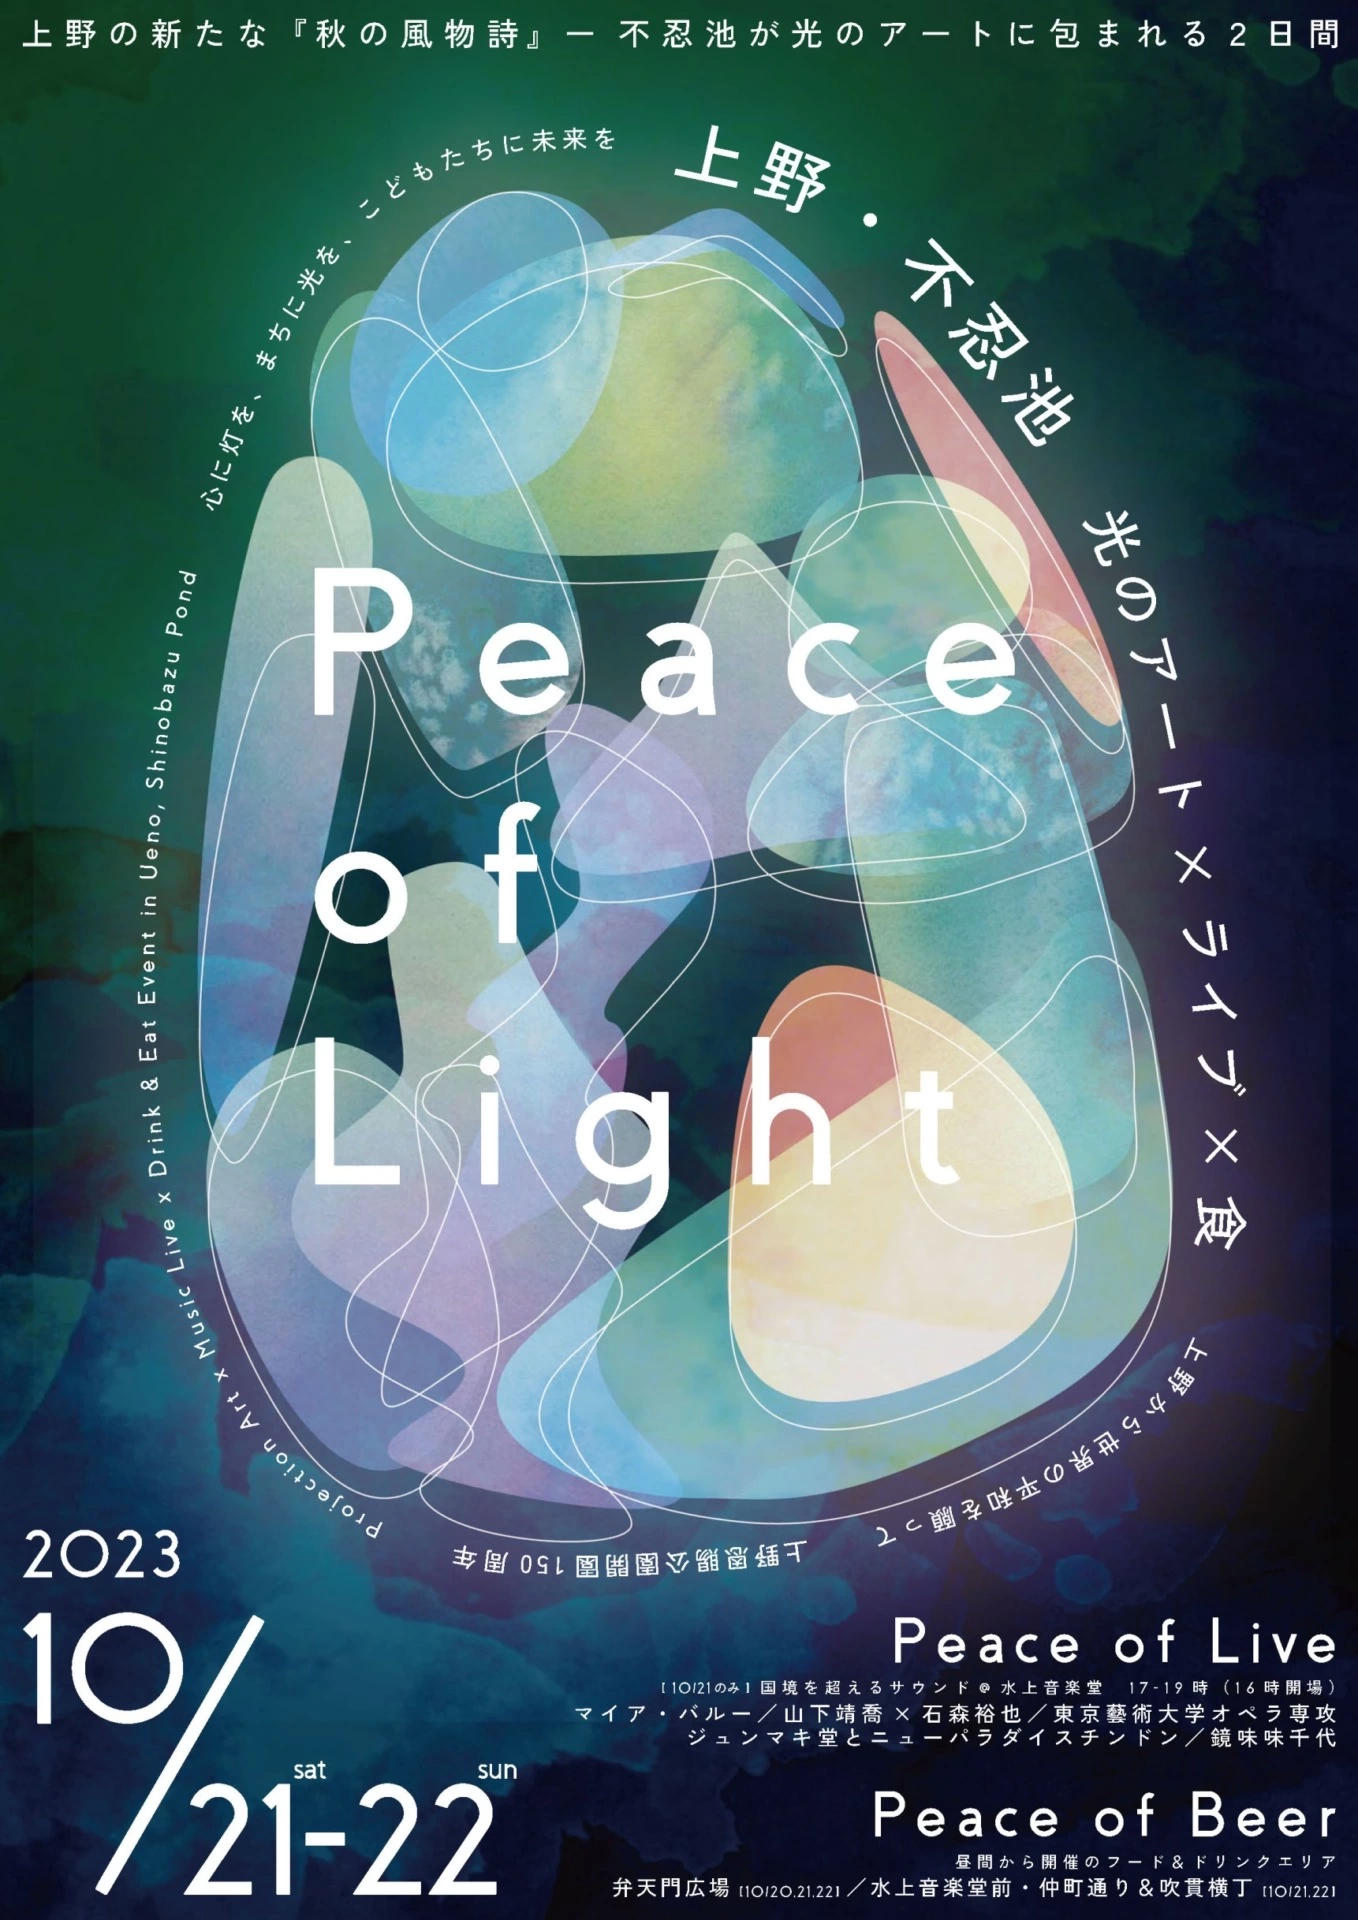 Peace of Light / Peace of Live / Peace of Beer